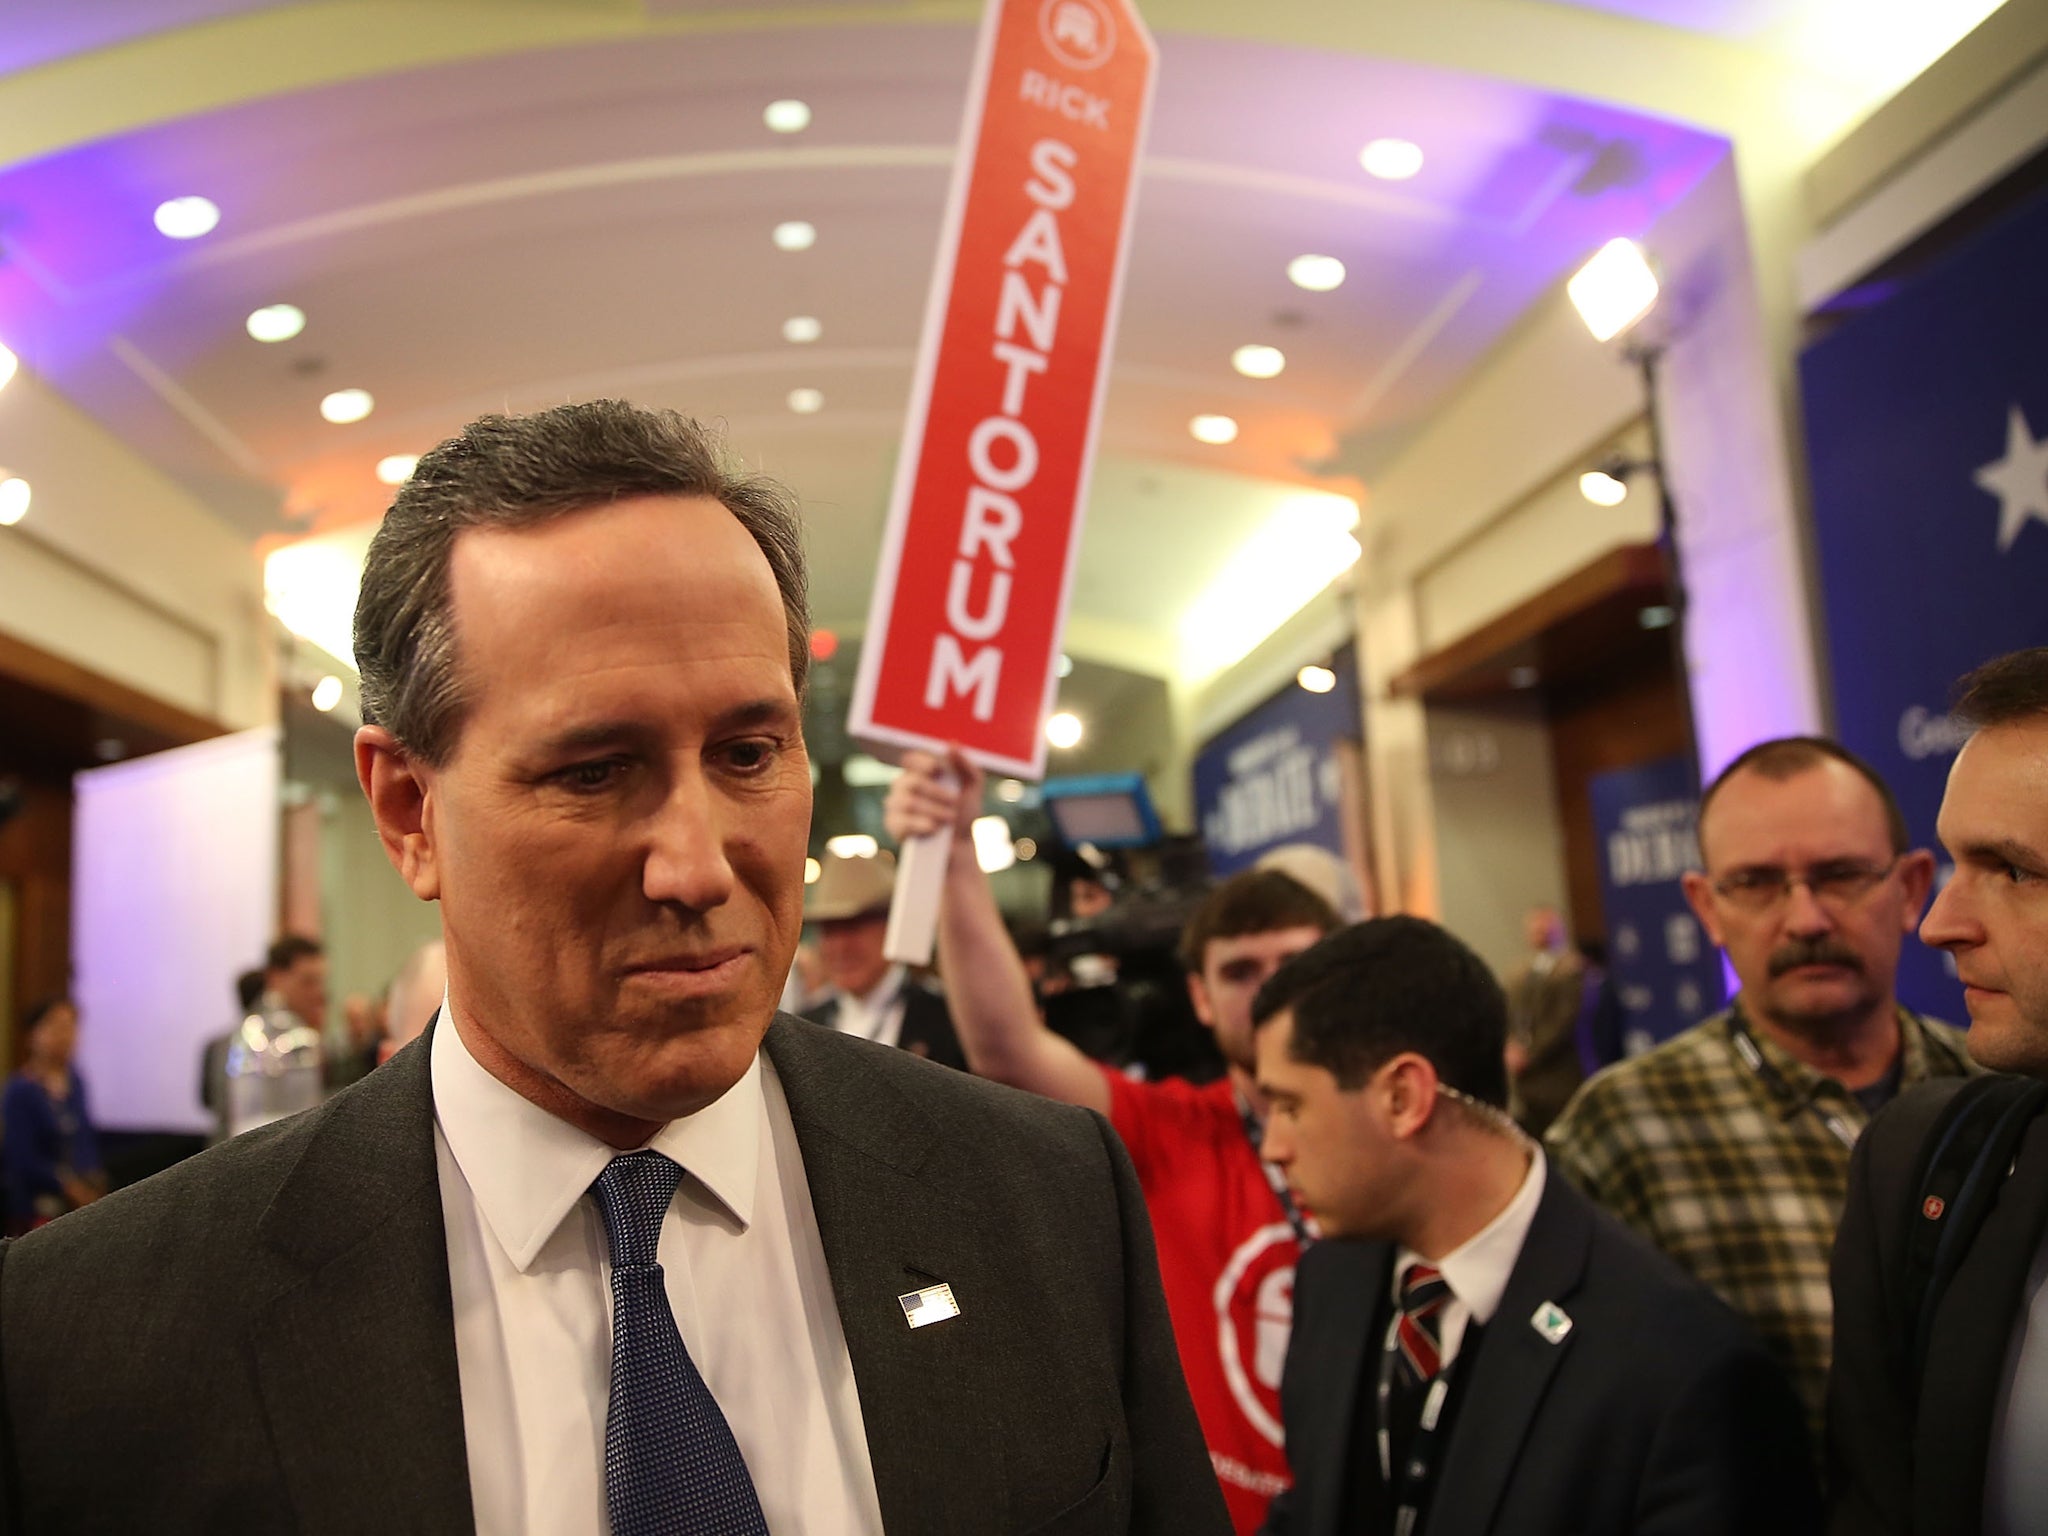 Rick Santorum To Drop Out Of Presidential Race After Poor Showing In